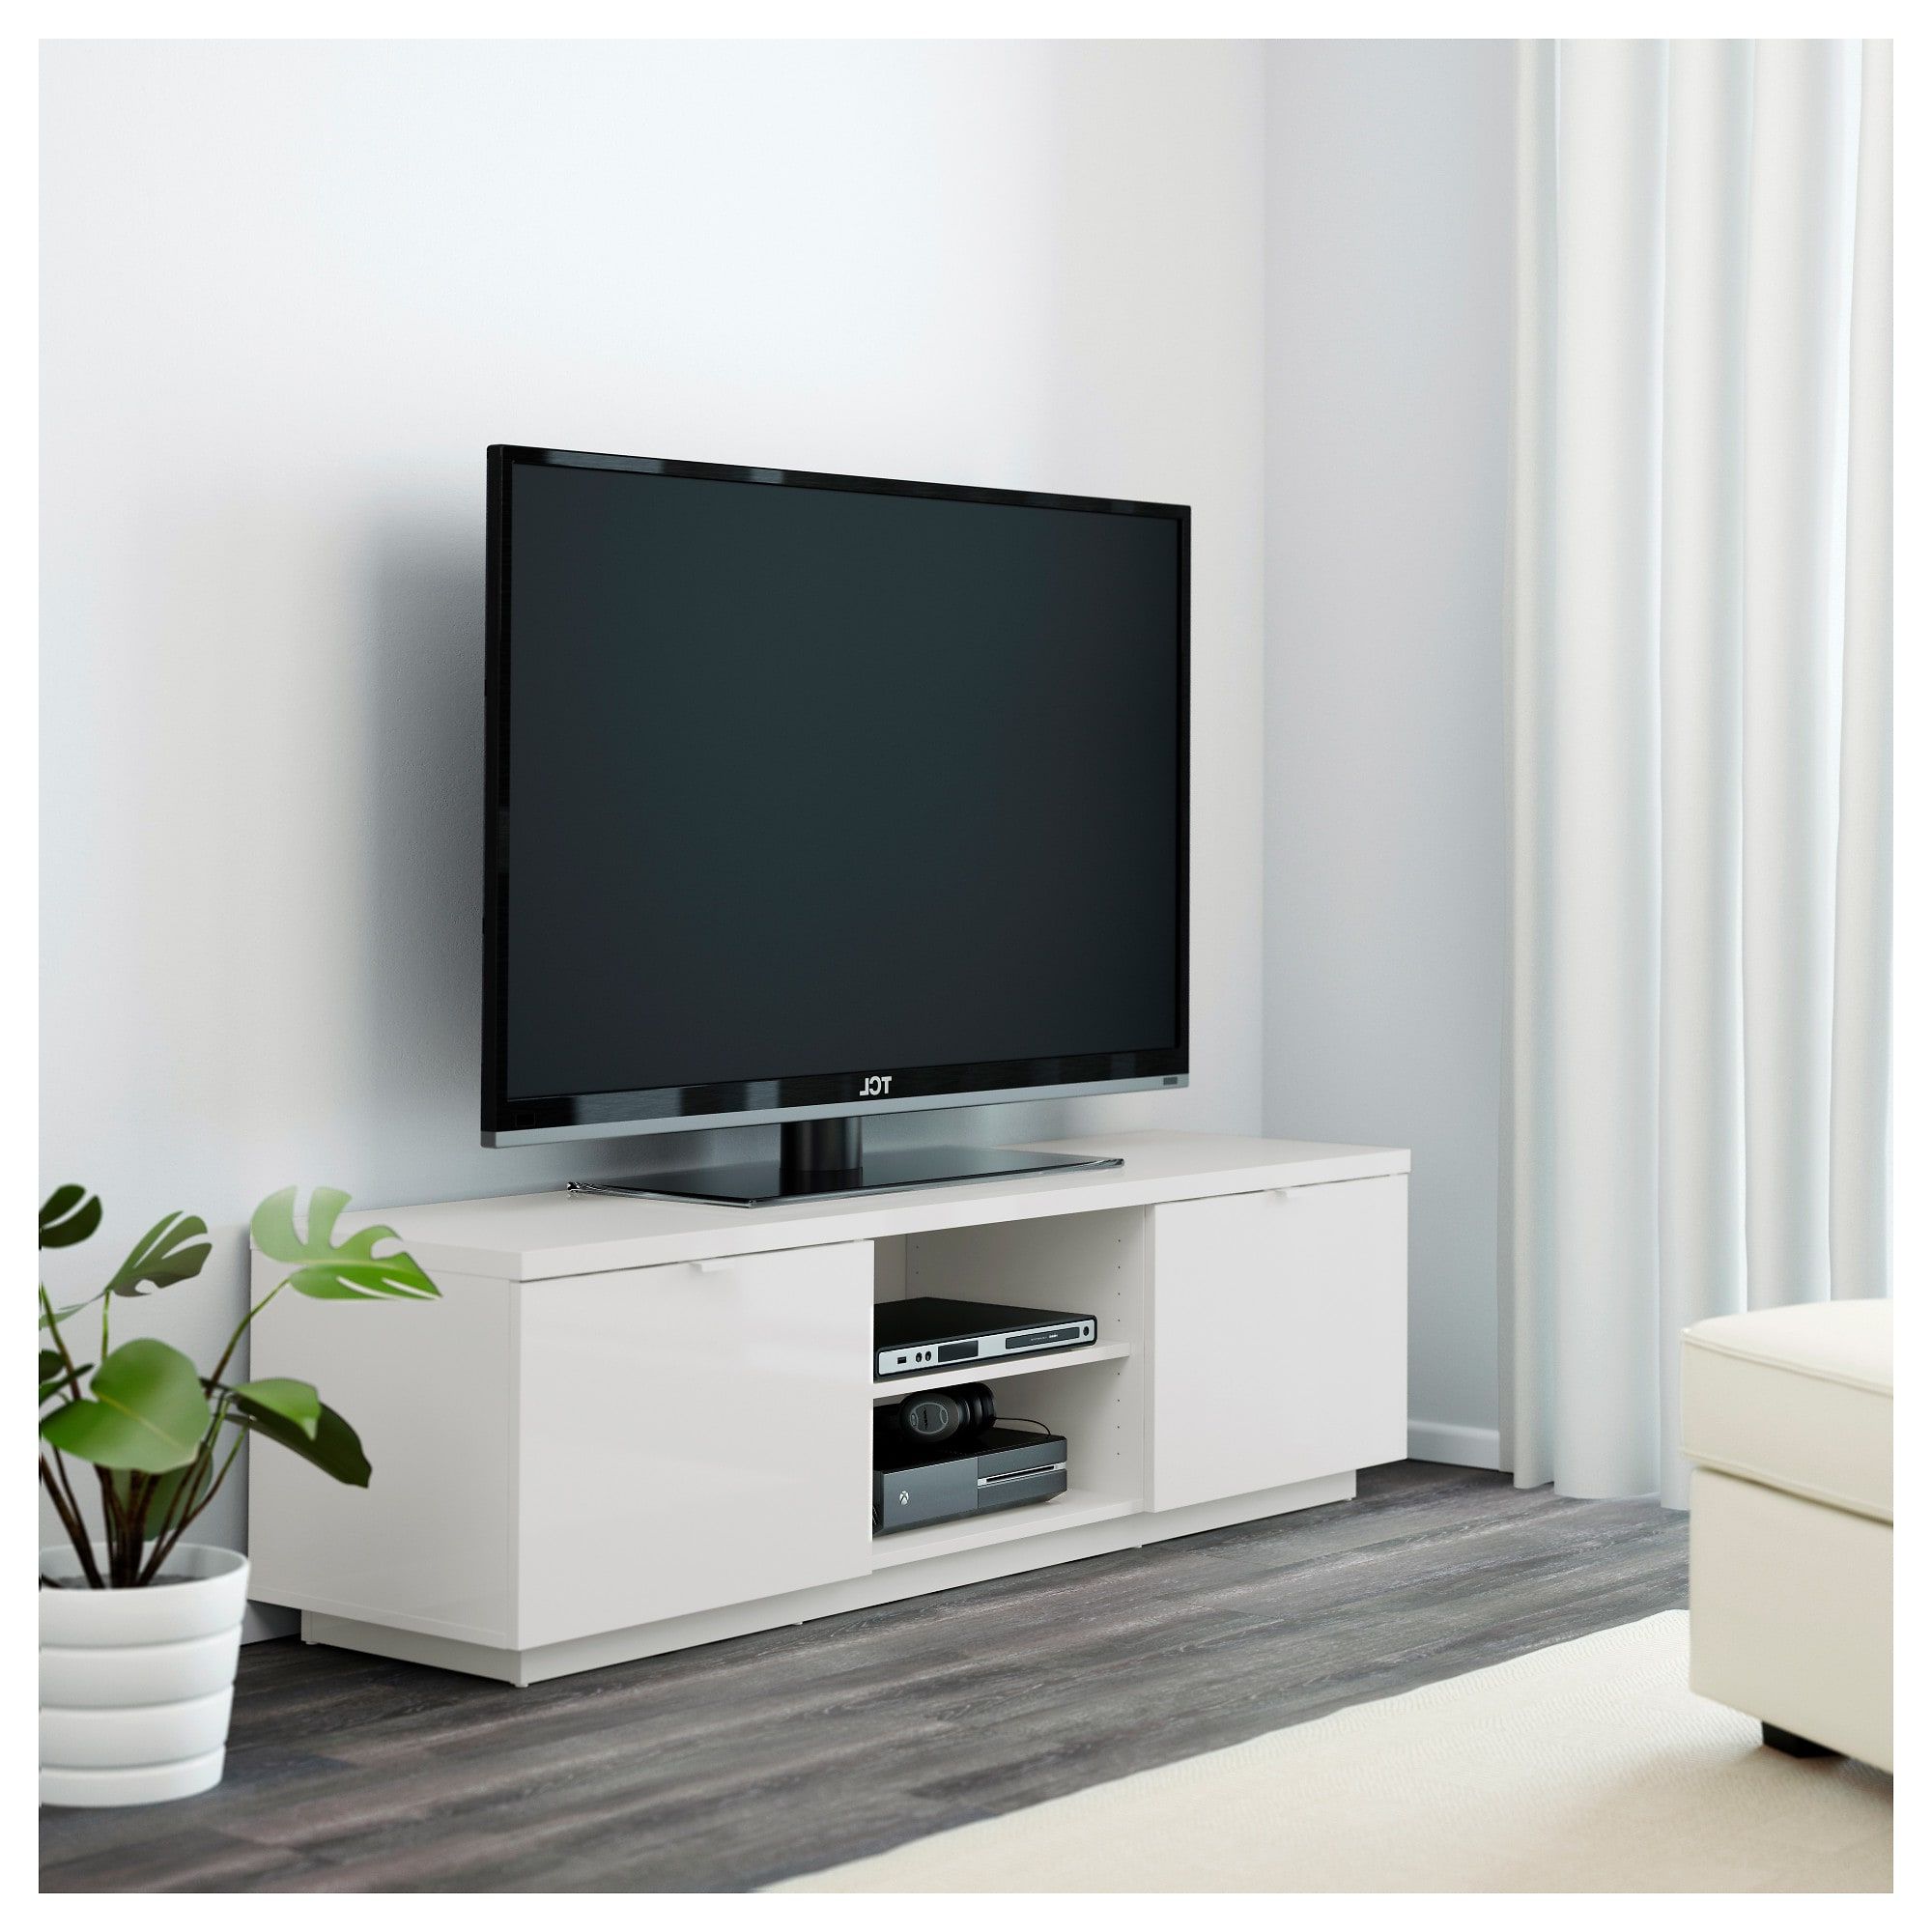 Preferred Byås Tv Bench High Gloss White 160 X 42 X 45 Cm – Ikea Throughout Black Gloss Tv Benches (Photo 15 of 20)